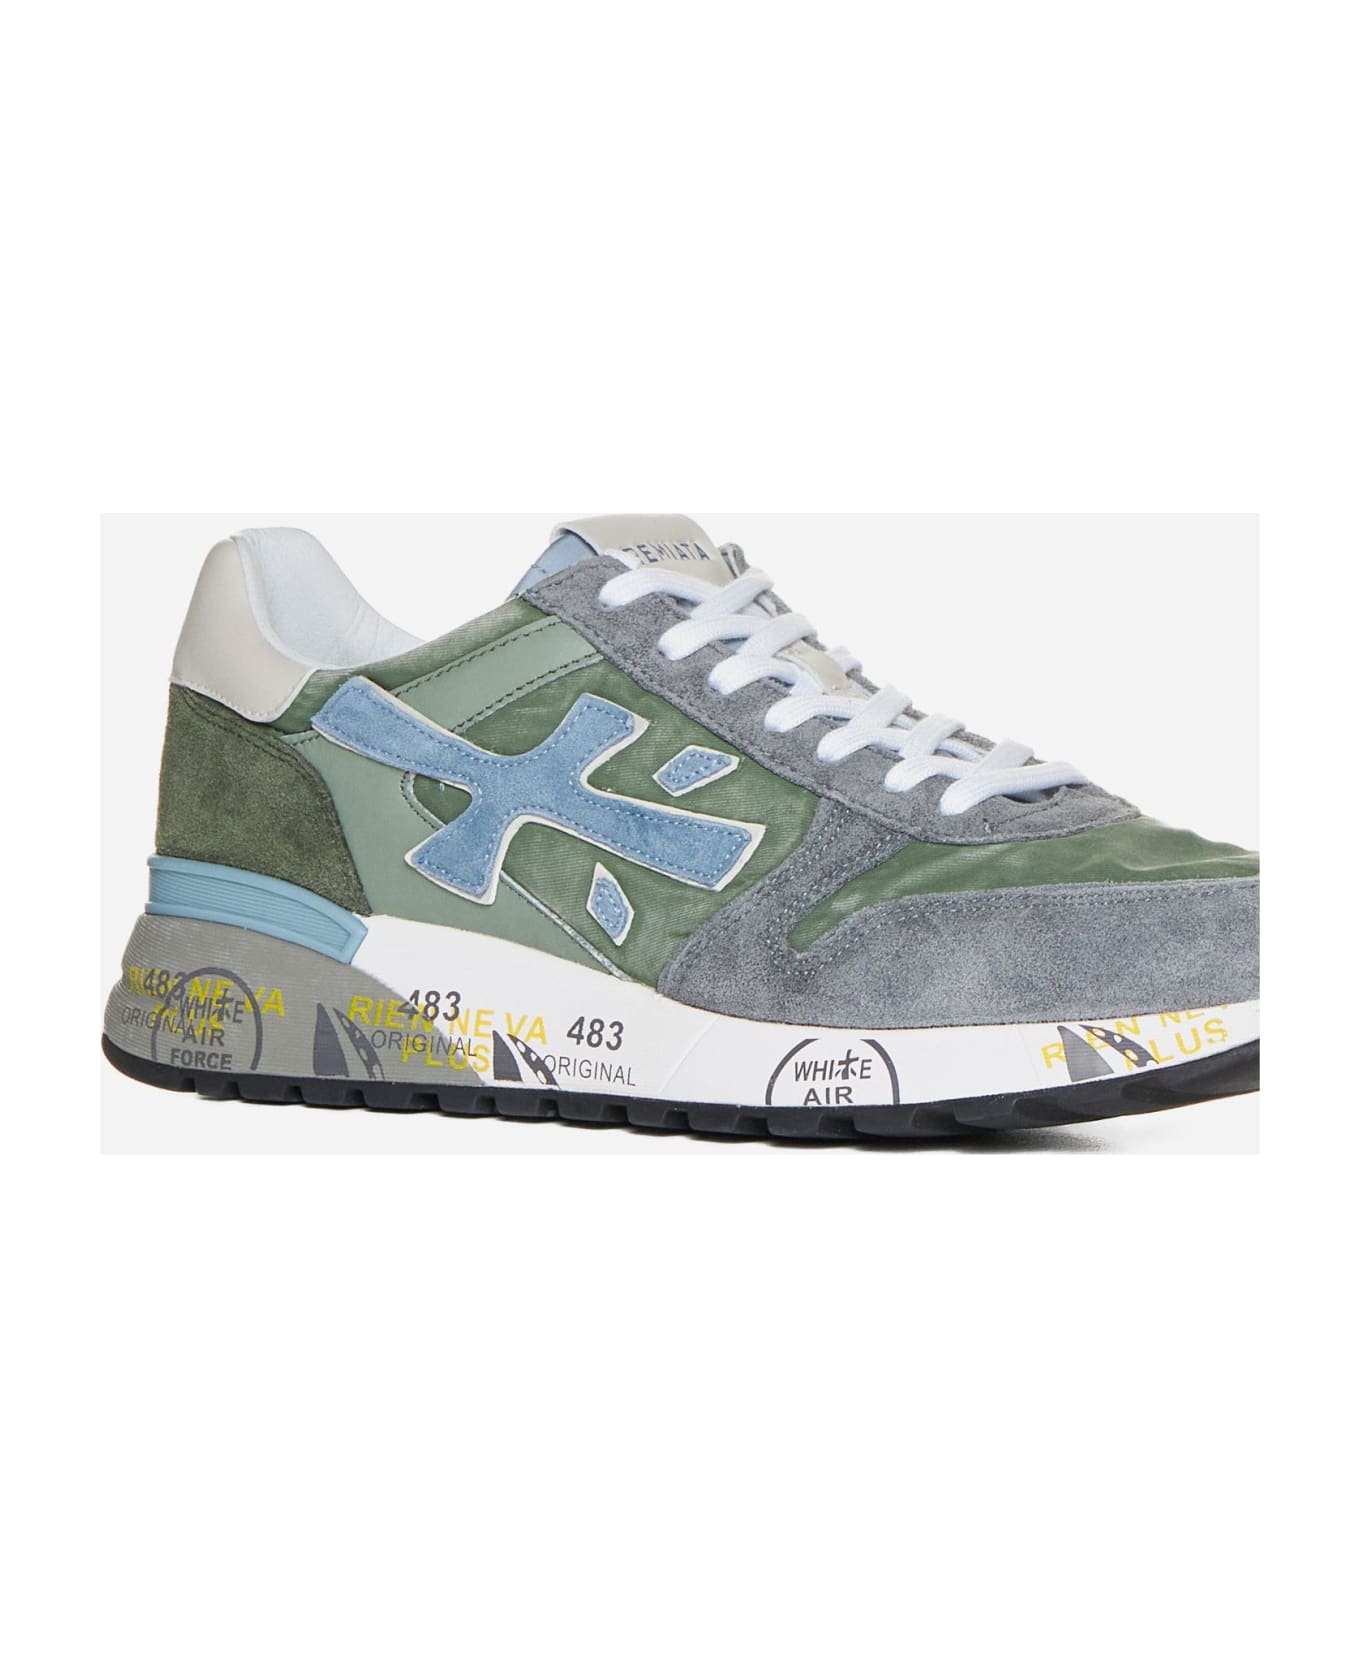 Premiata Mick Suede, Fabric And Leather Sneakers - Military green